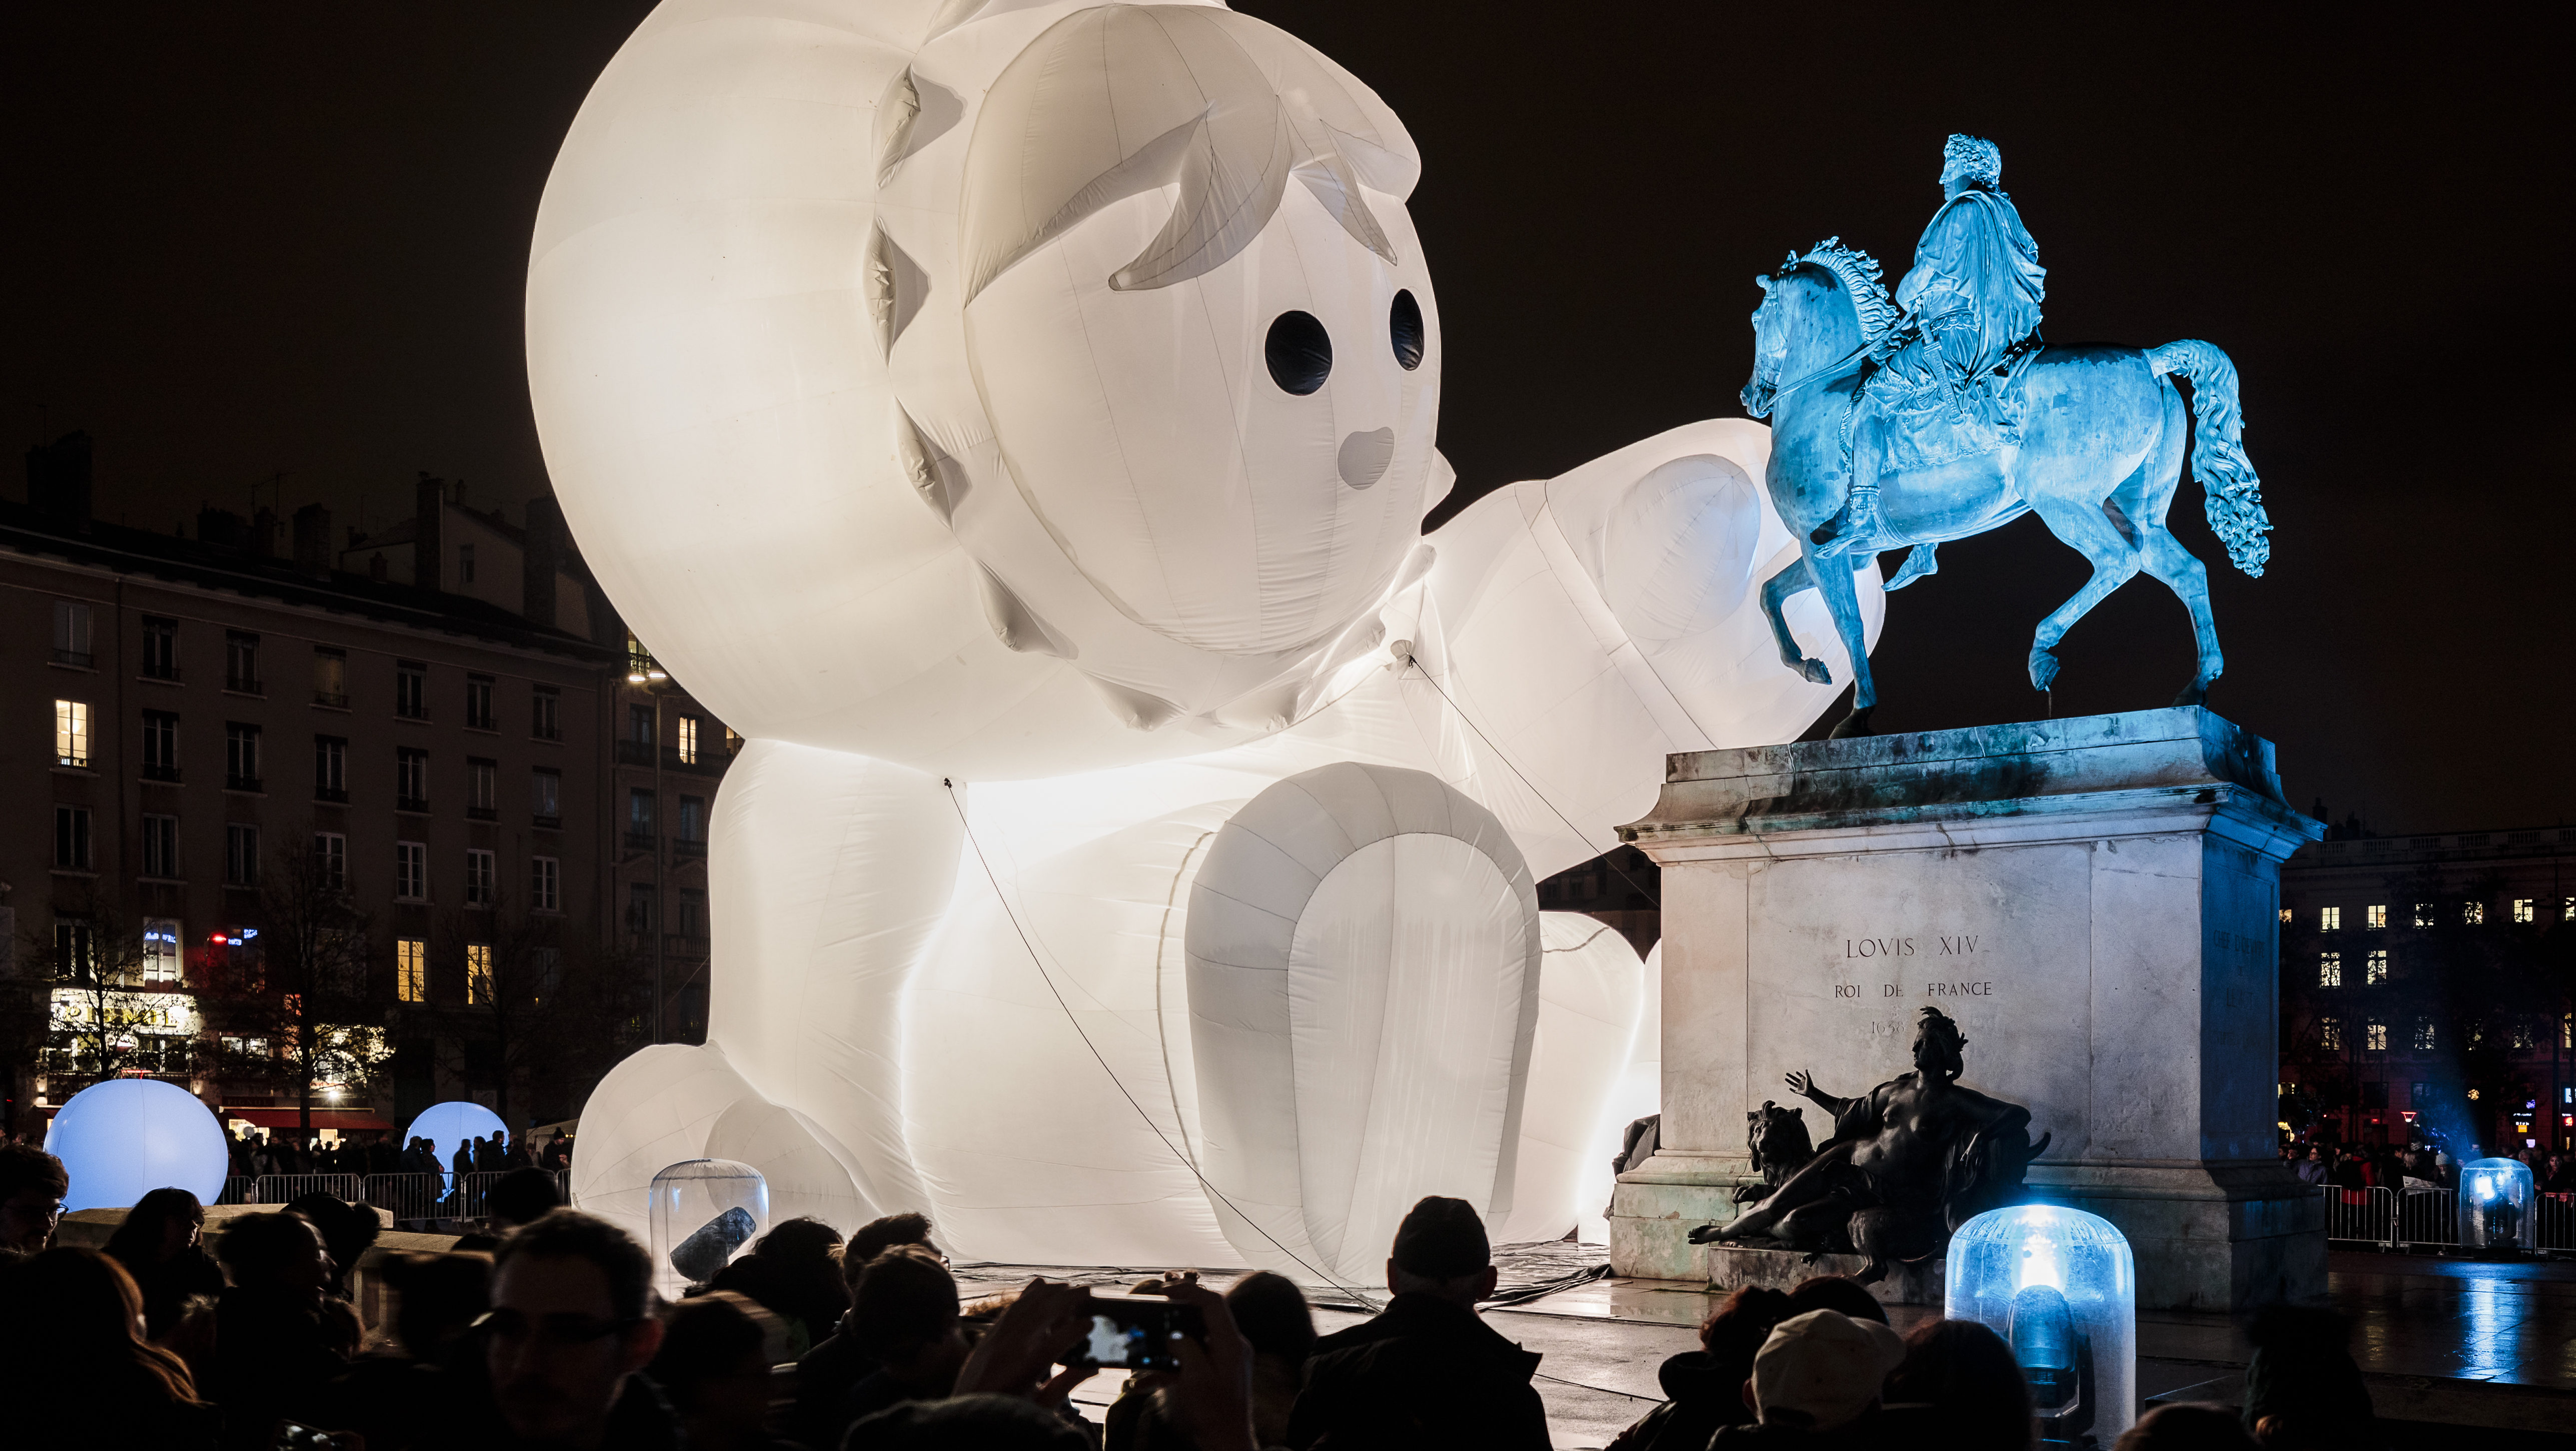 A giant inflatable character plays with the statue of Louis XIV in Lyon